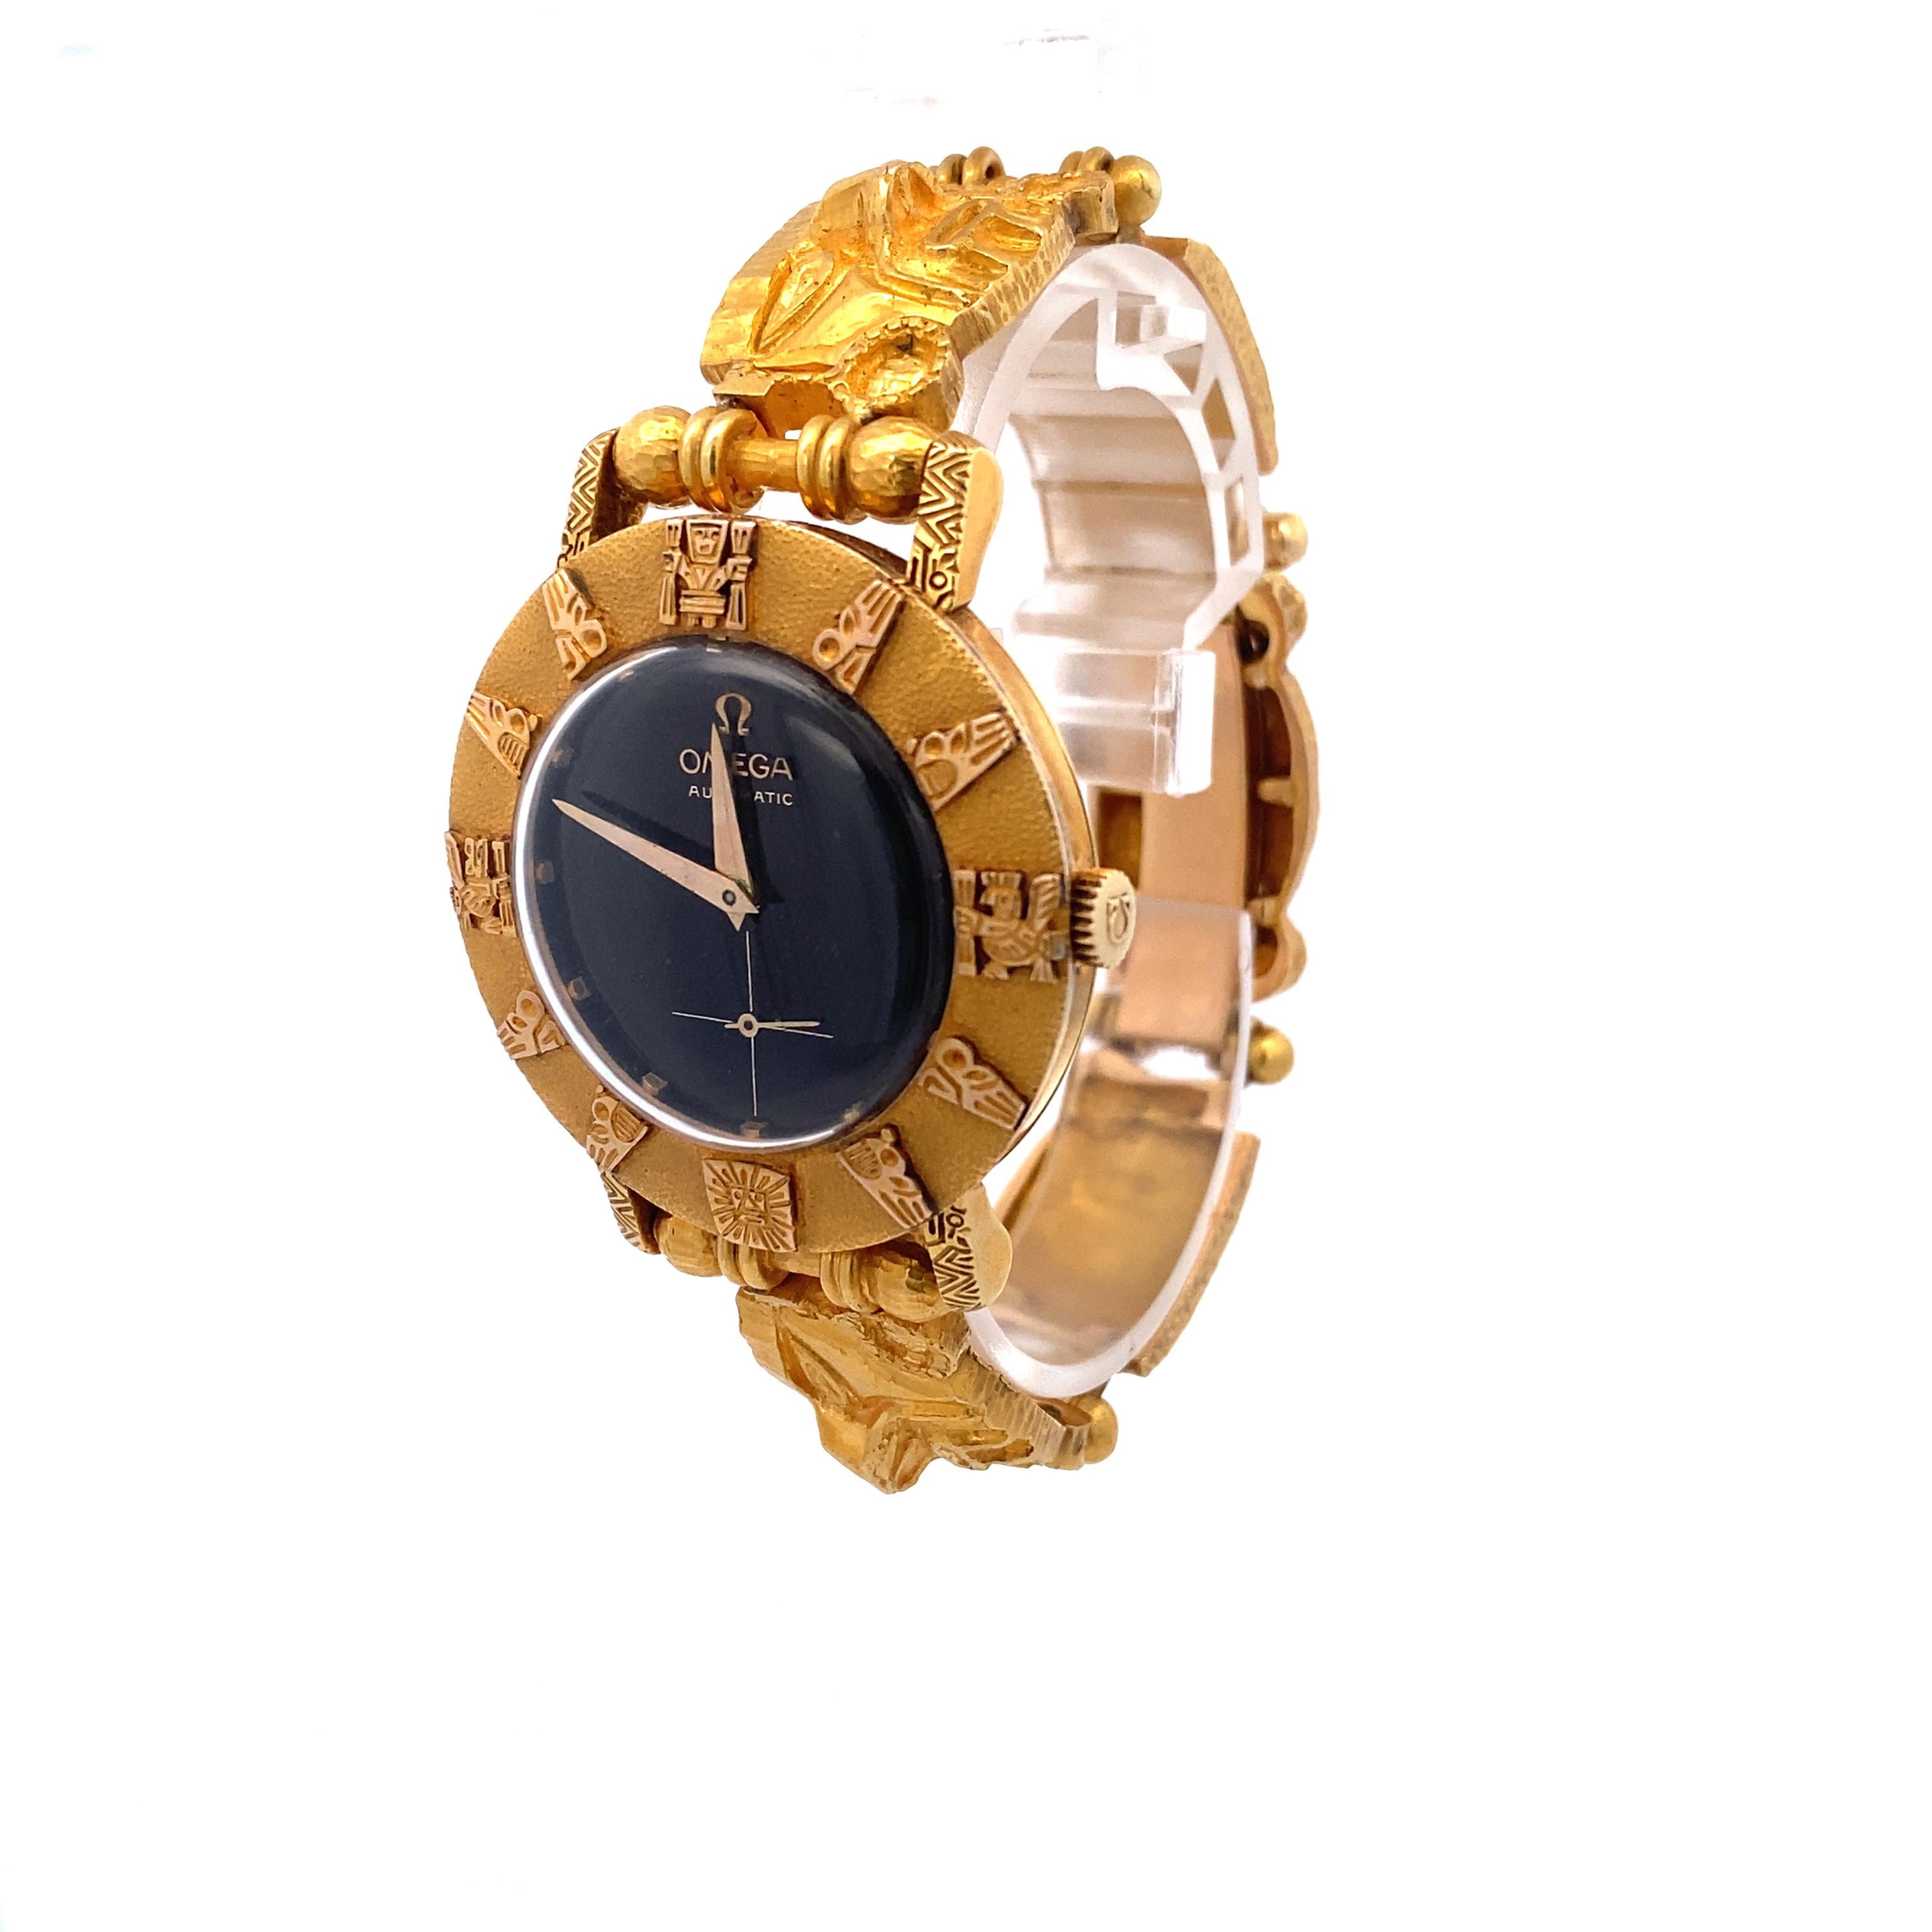 Introducing the exquisite Omega Mechanical Watch with Custom Made Solid 18k Gold Peruvian Moche Case and Bracelet, a true masterpiece in the world of luxury watches. This vintage, circa 1960-70's watch, was crafted with precision and care, this